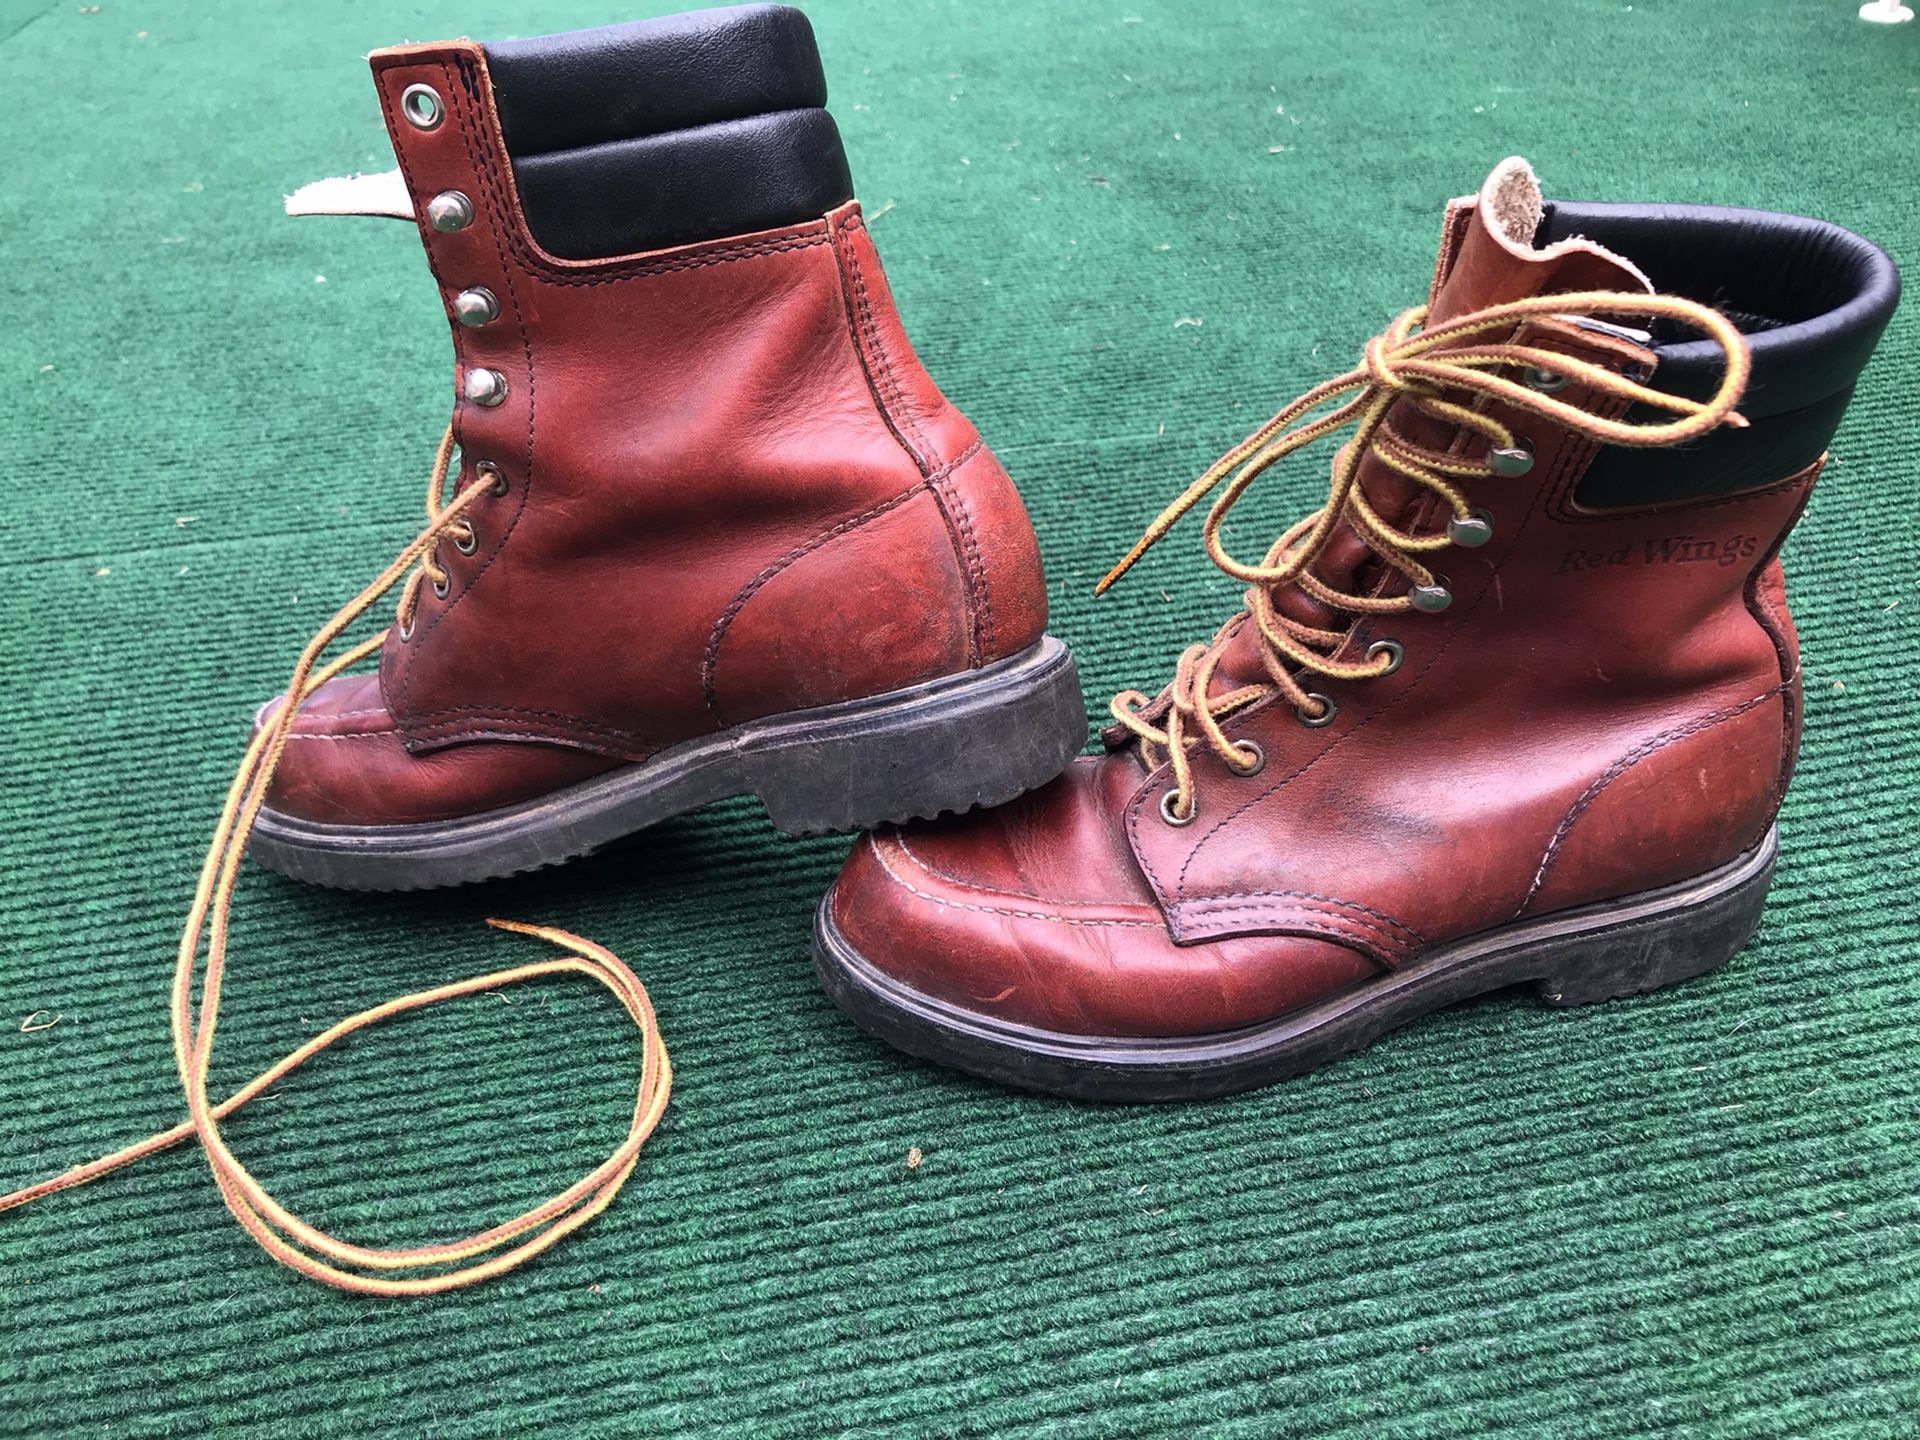 Vintage Red Wing moc toe men’s boots - size 6.5